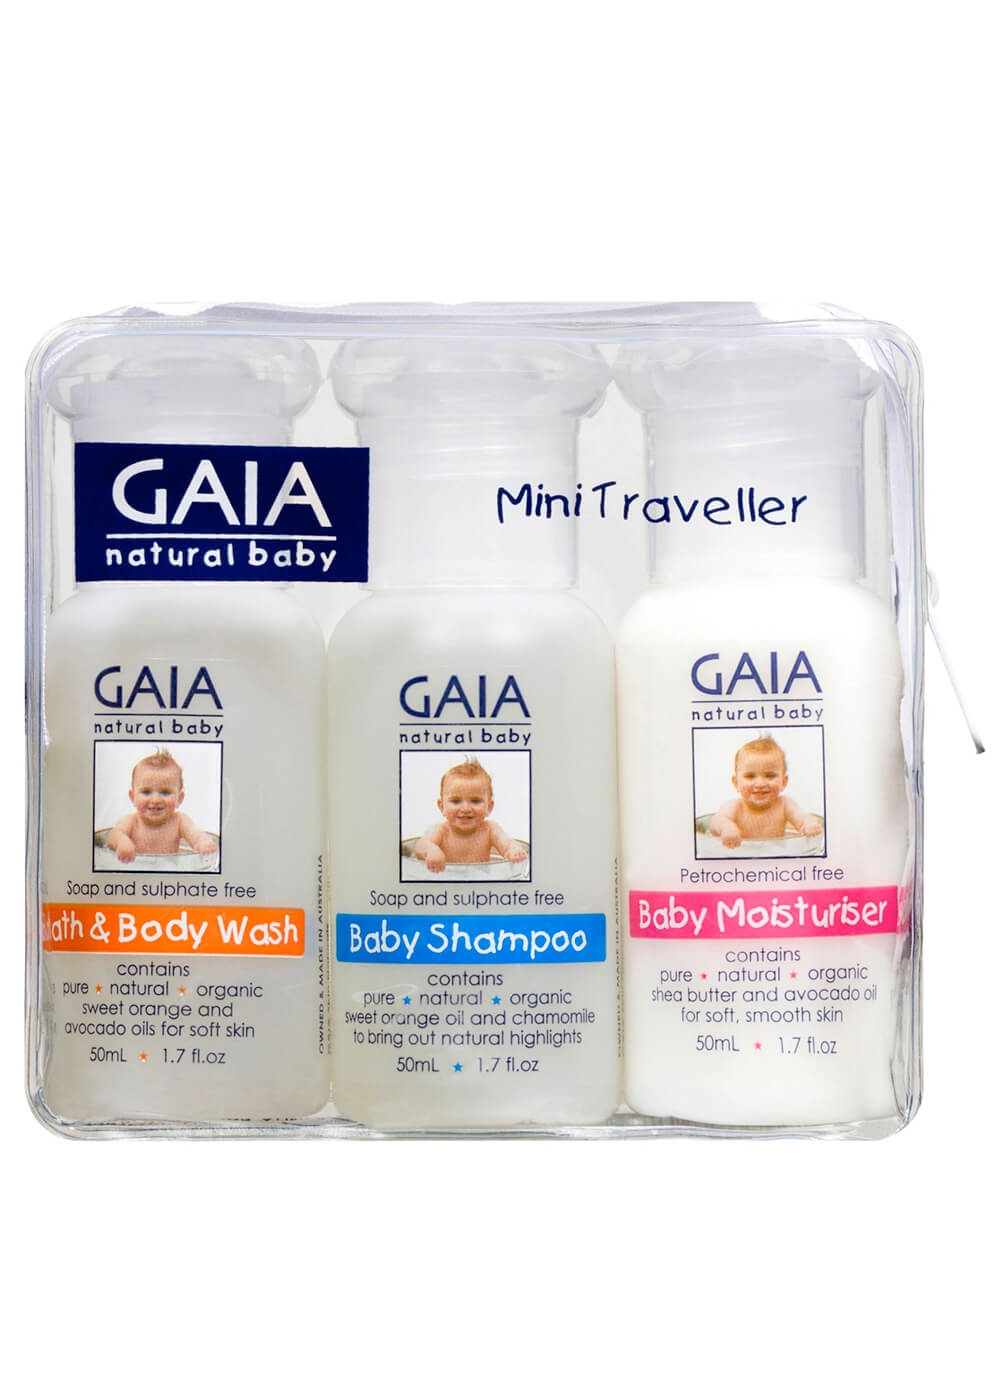 Queen Bee Natural Baby Mini Traveller Pack by GAIA Skin Naturals